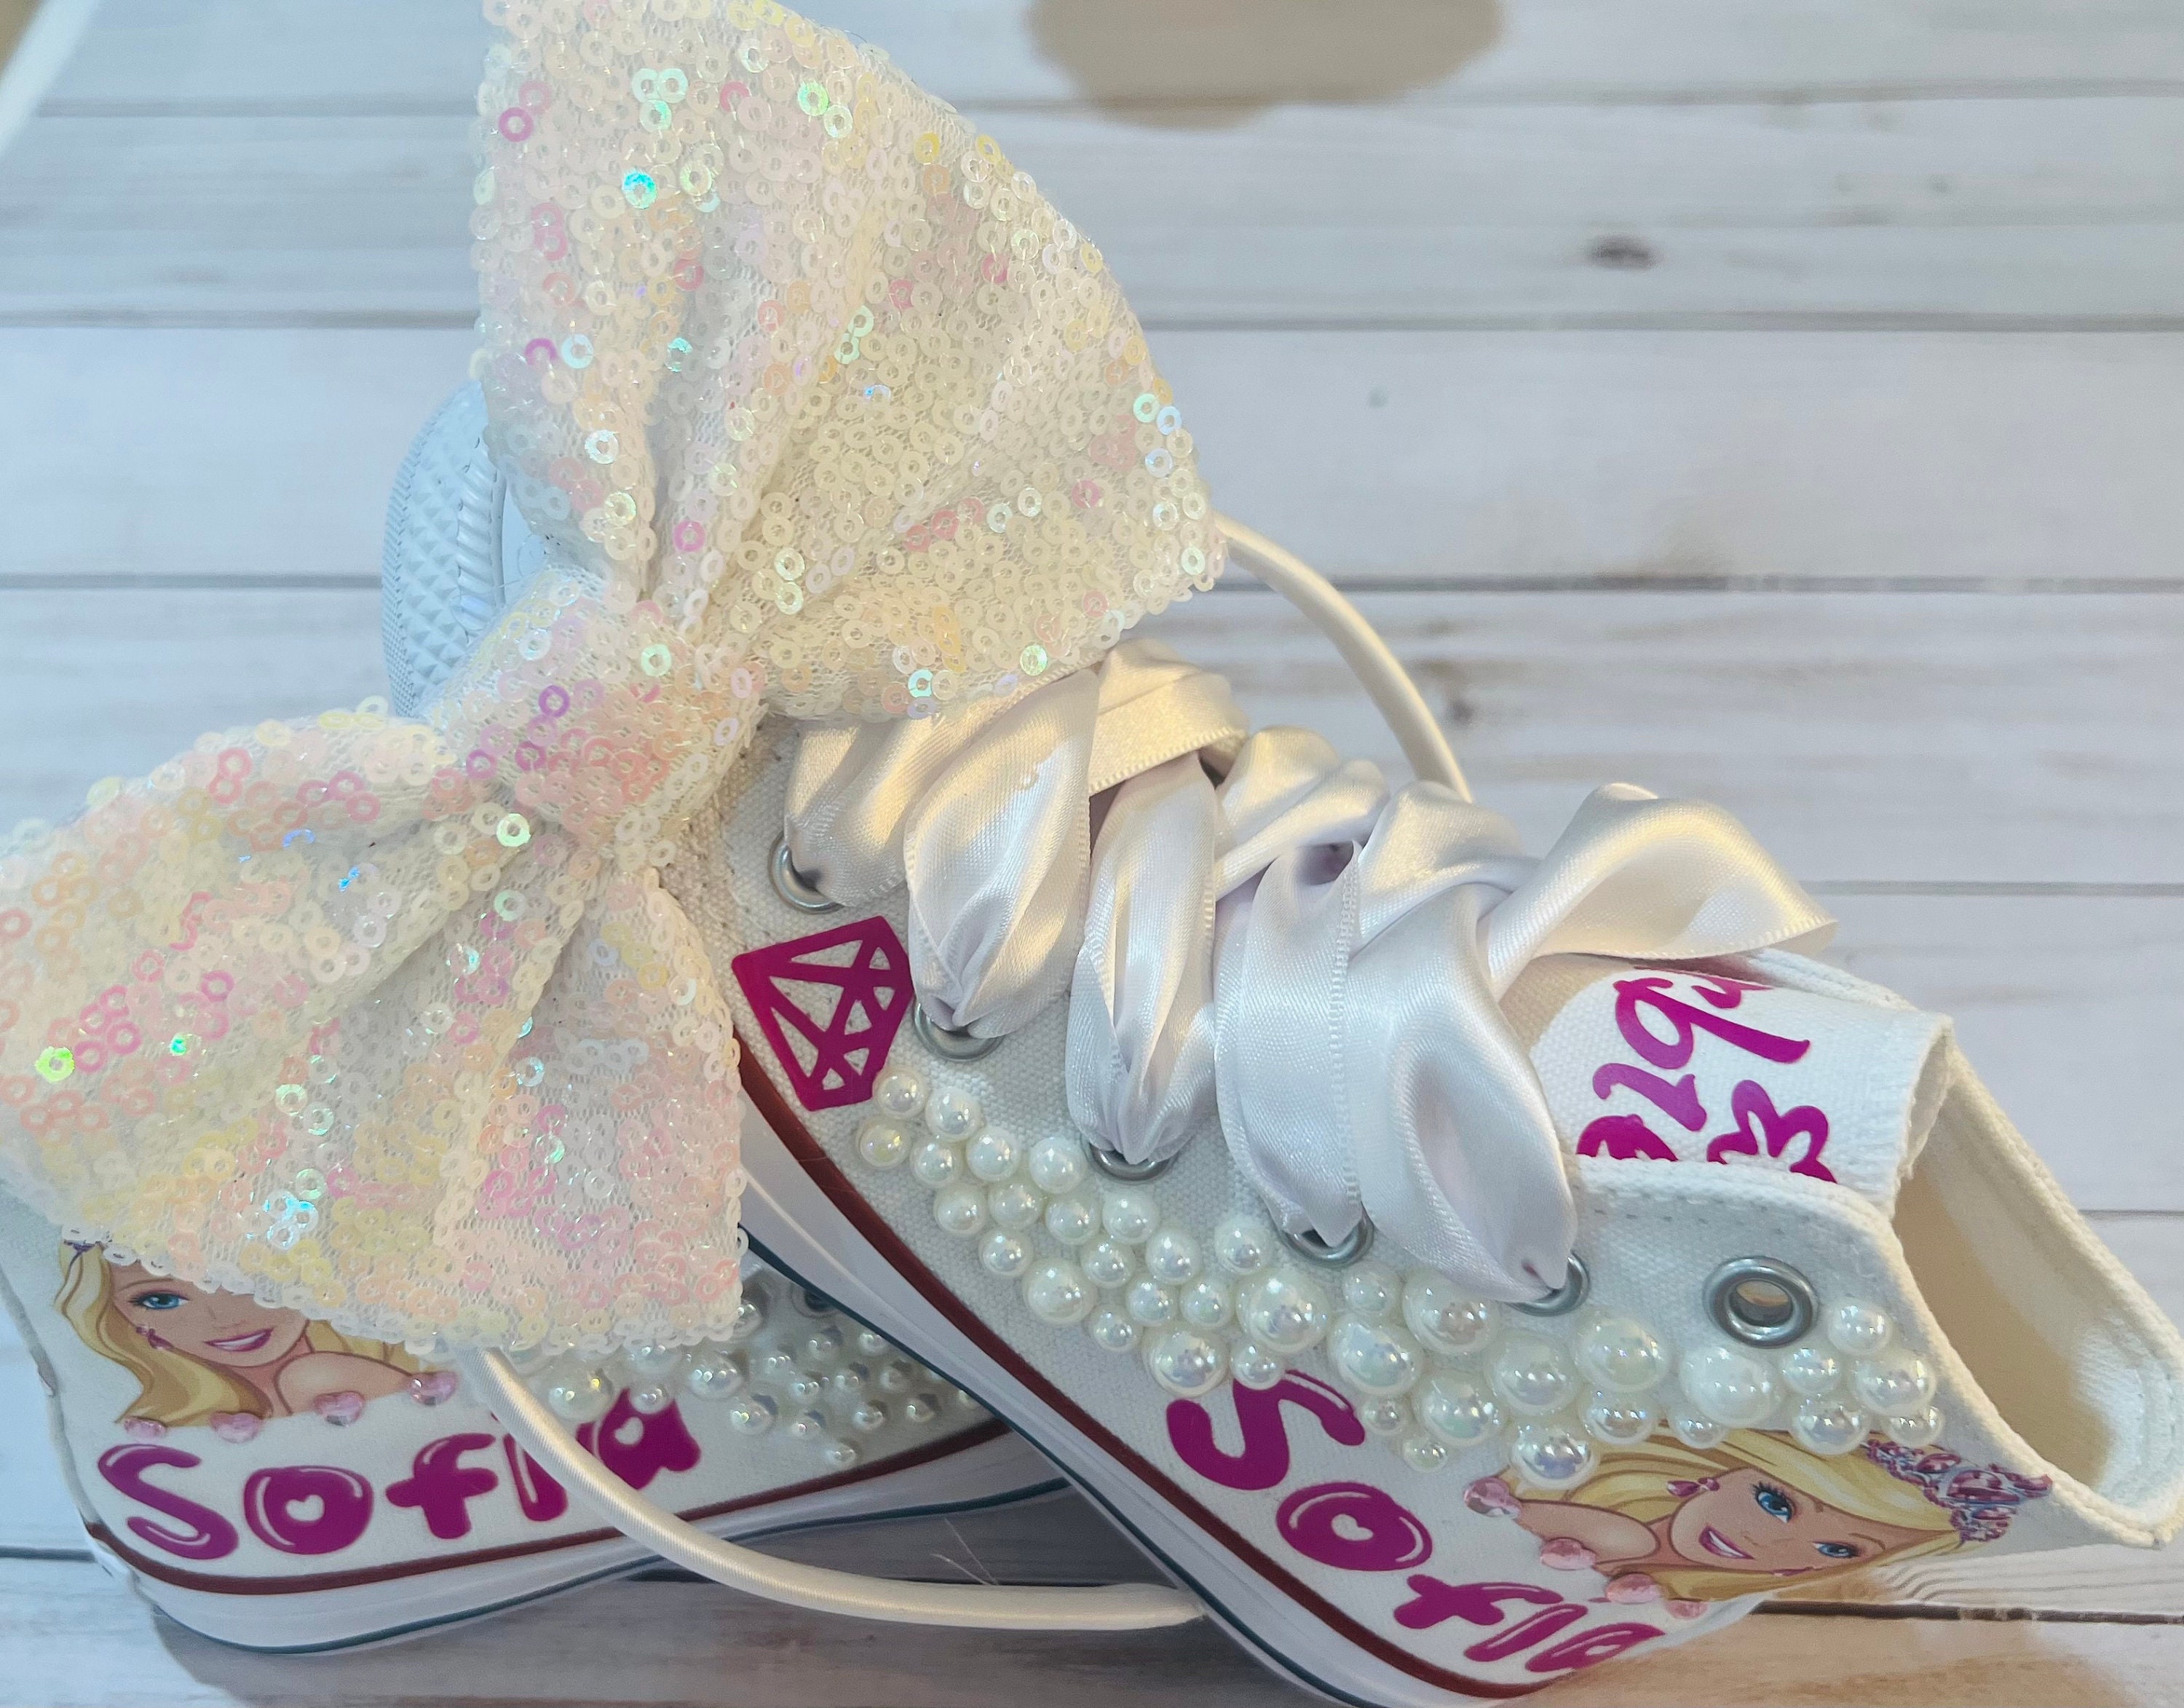 Barbie shoes- Barbie bling Converse-Girls Barbie Shoes – Pink Toes & Hair  Bows